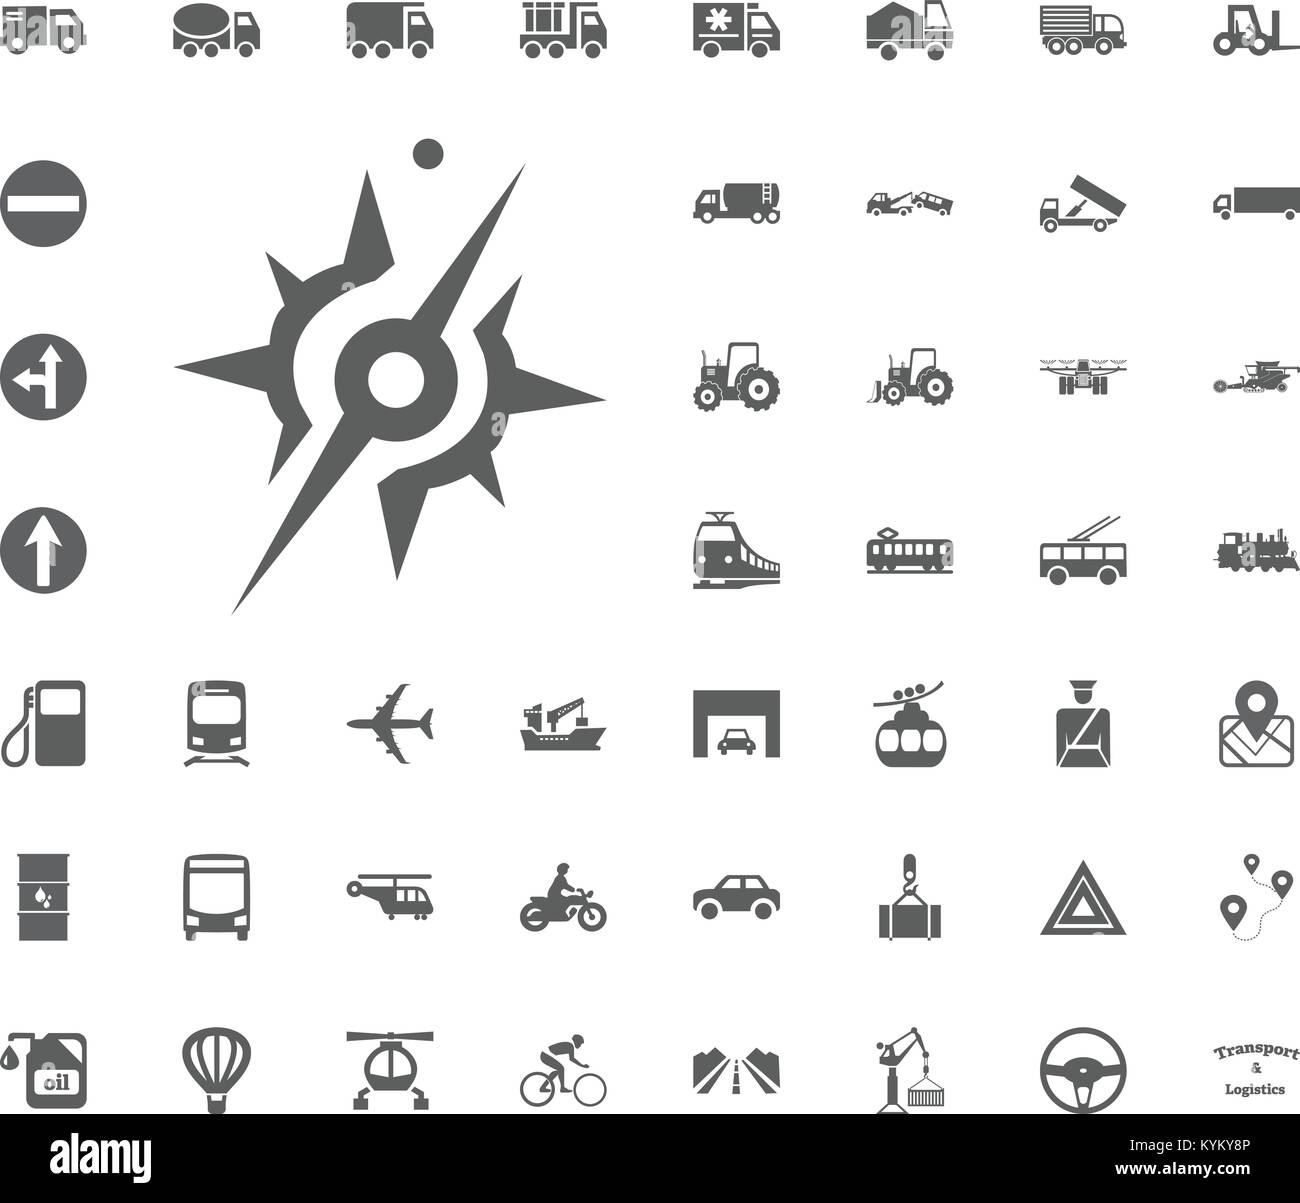 Compass icon. Transport and Logistics set icons. Transportation set icons. Stock Vector